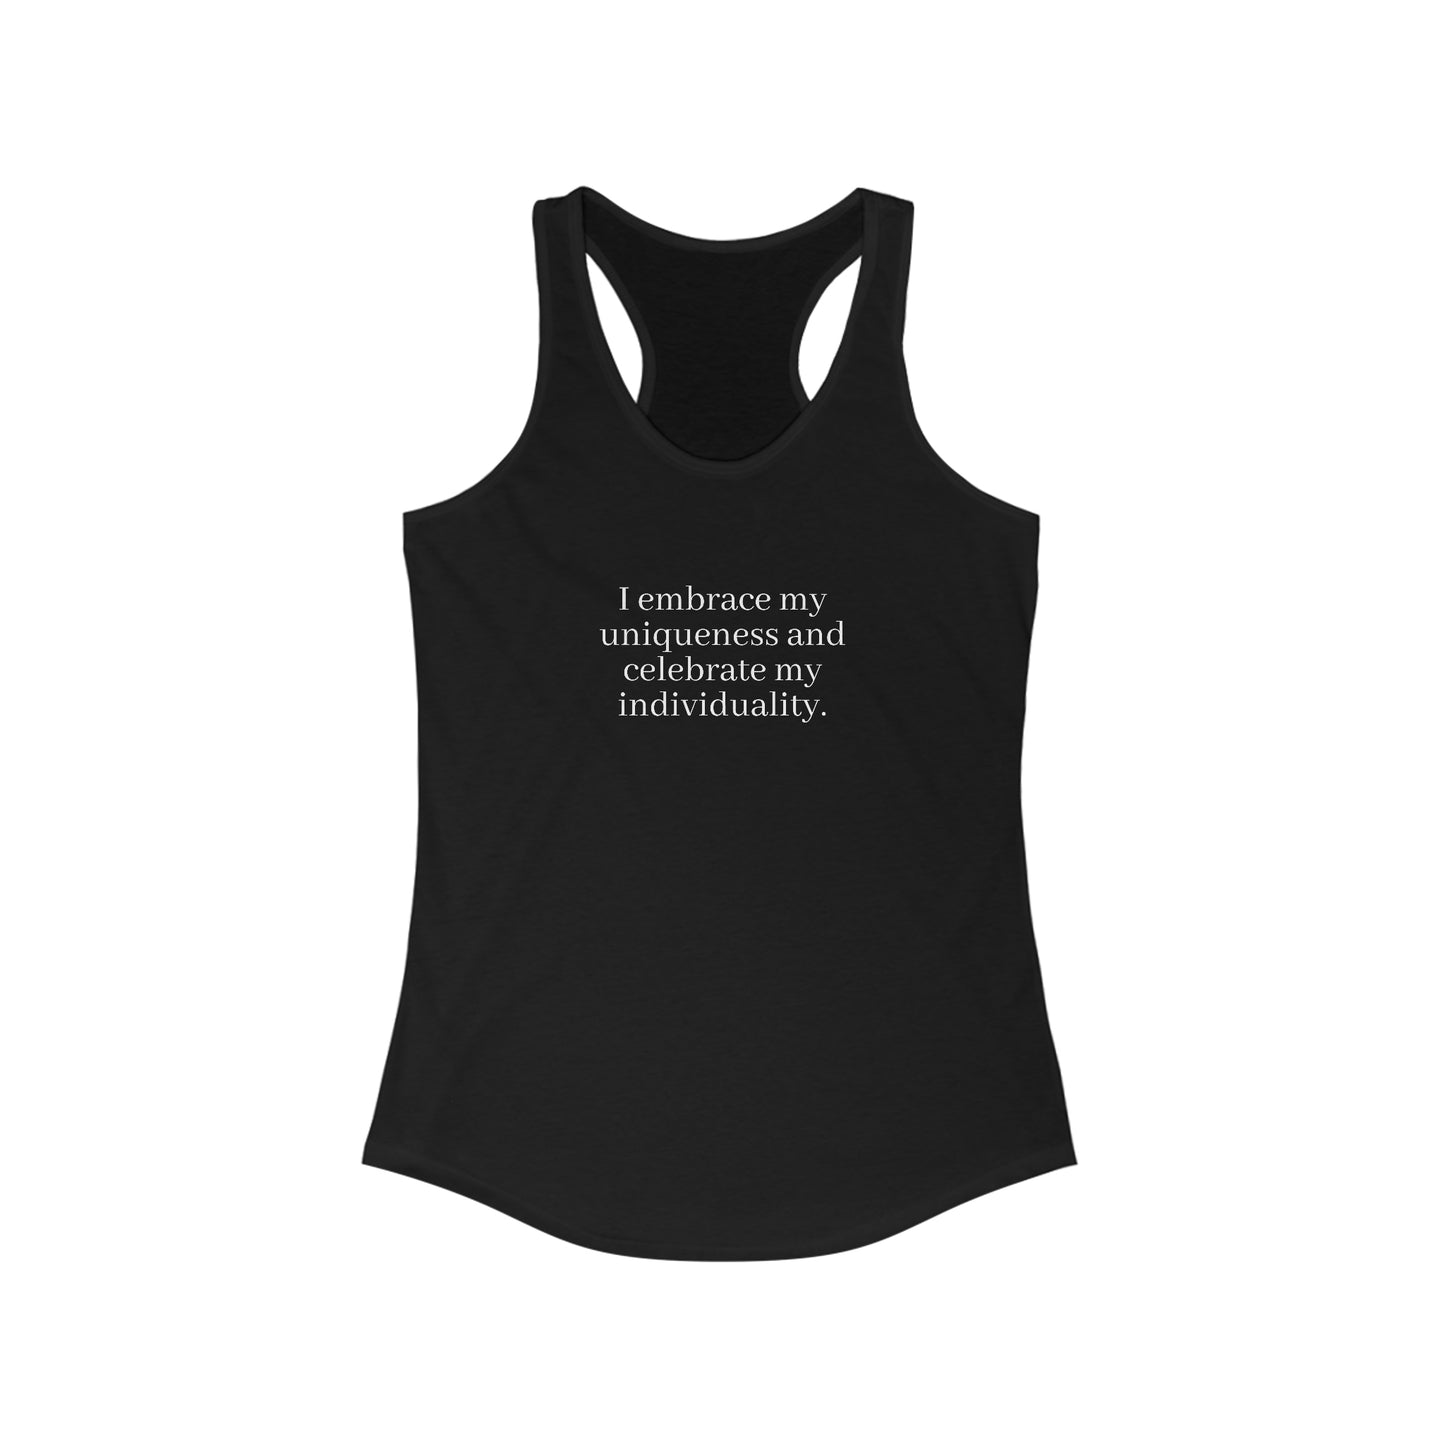 I embrace my uniqueness and celebrate my individuality. - Women's Ideal Racerback Tank